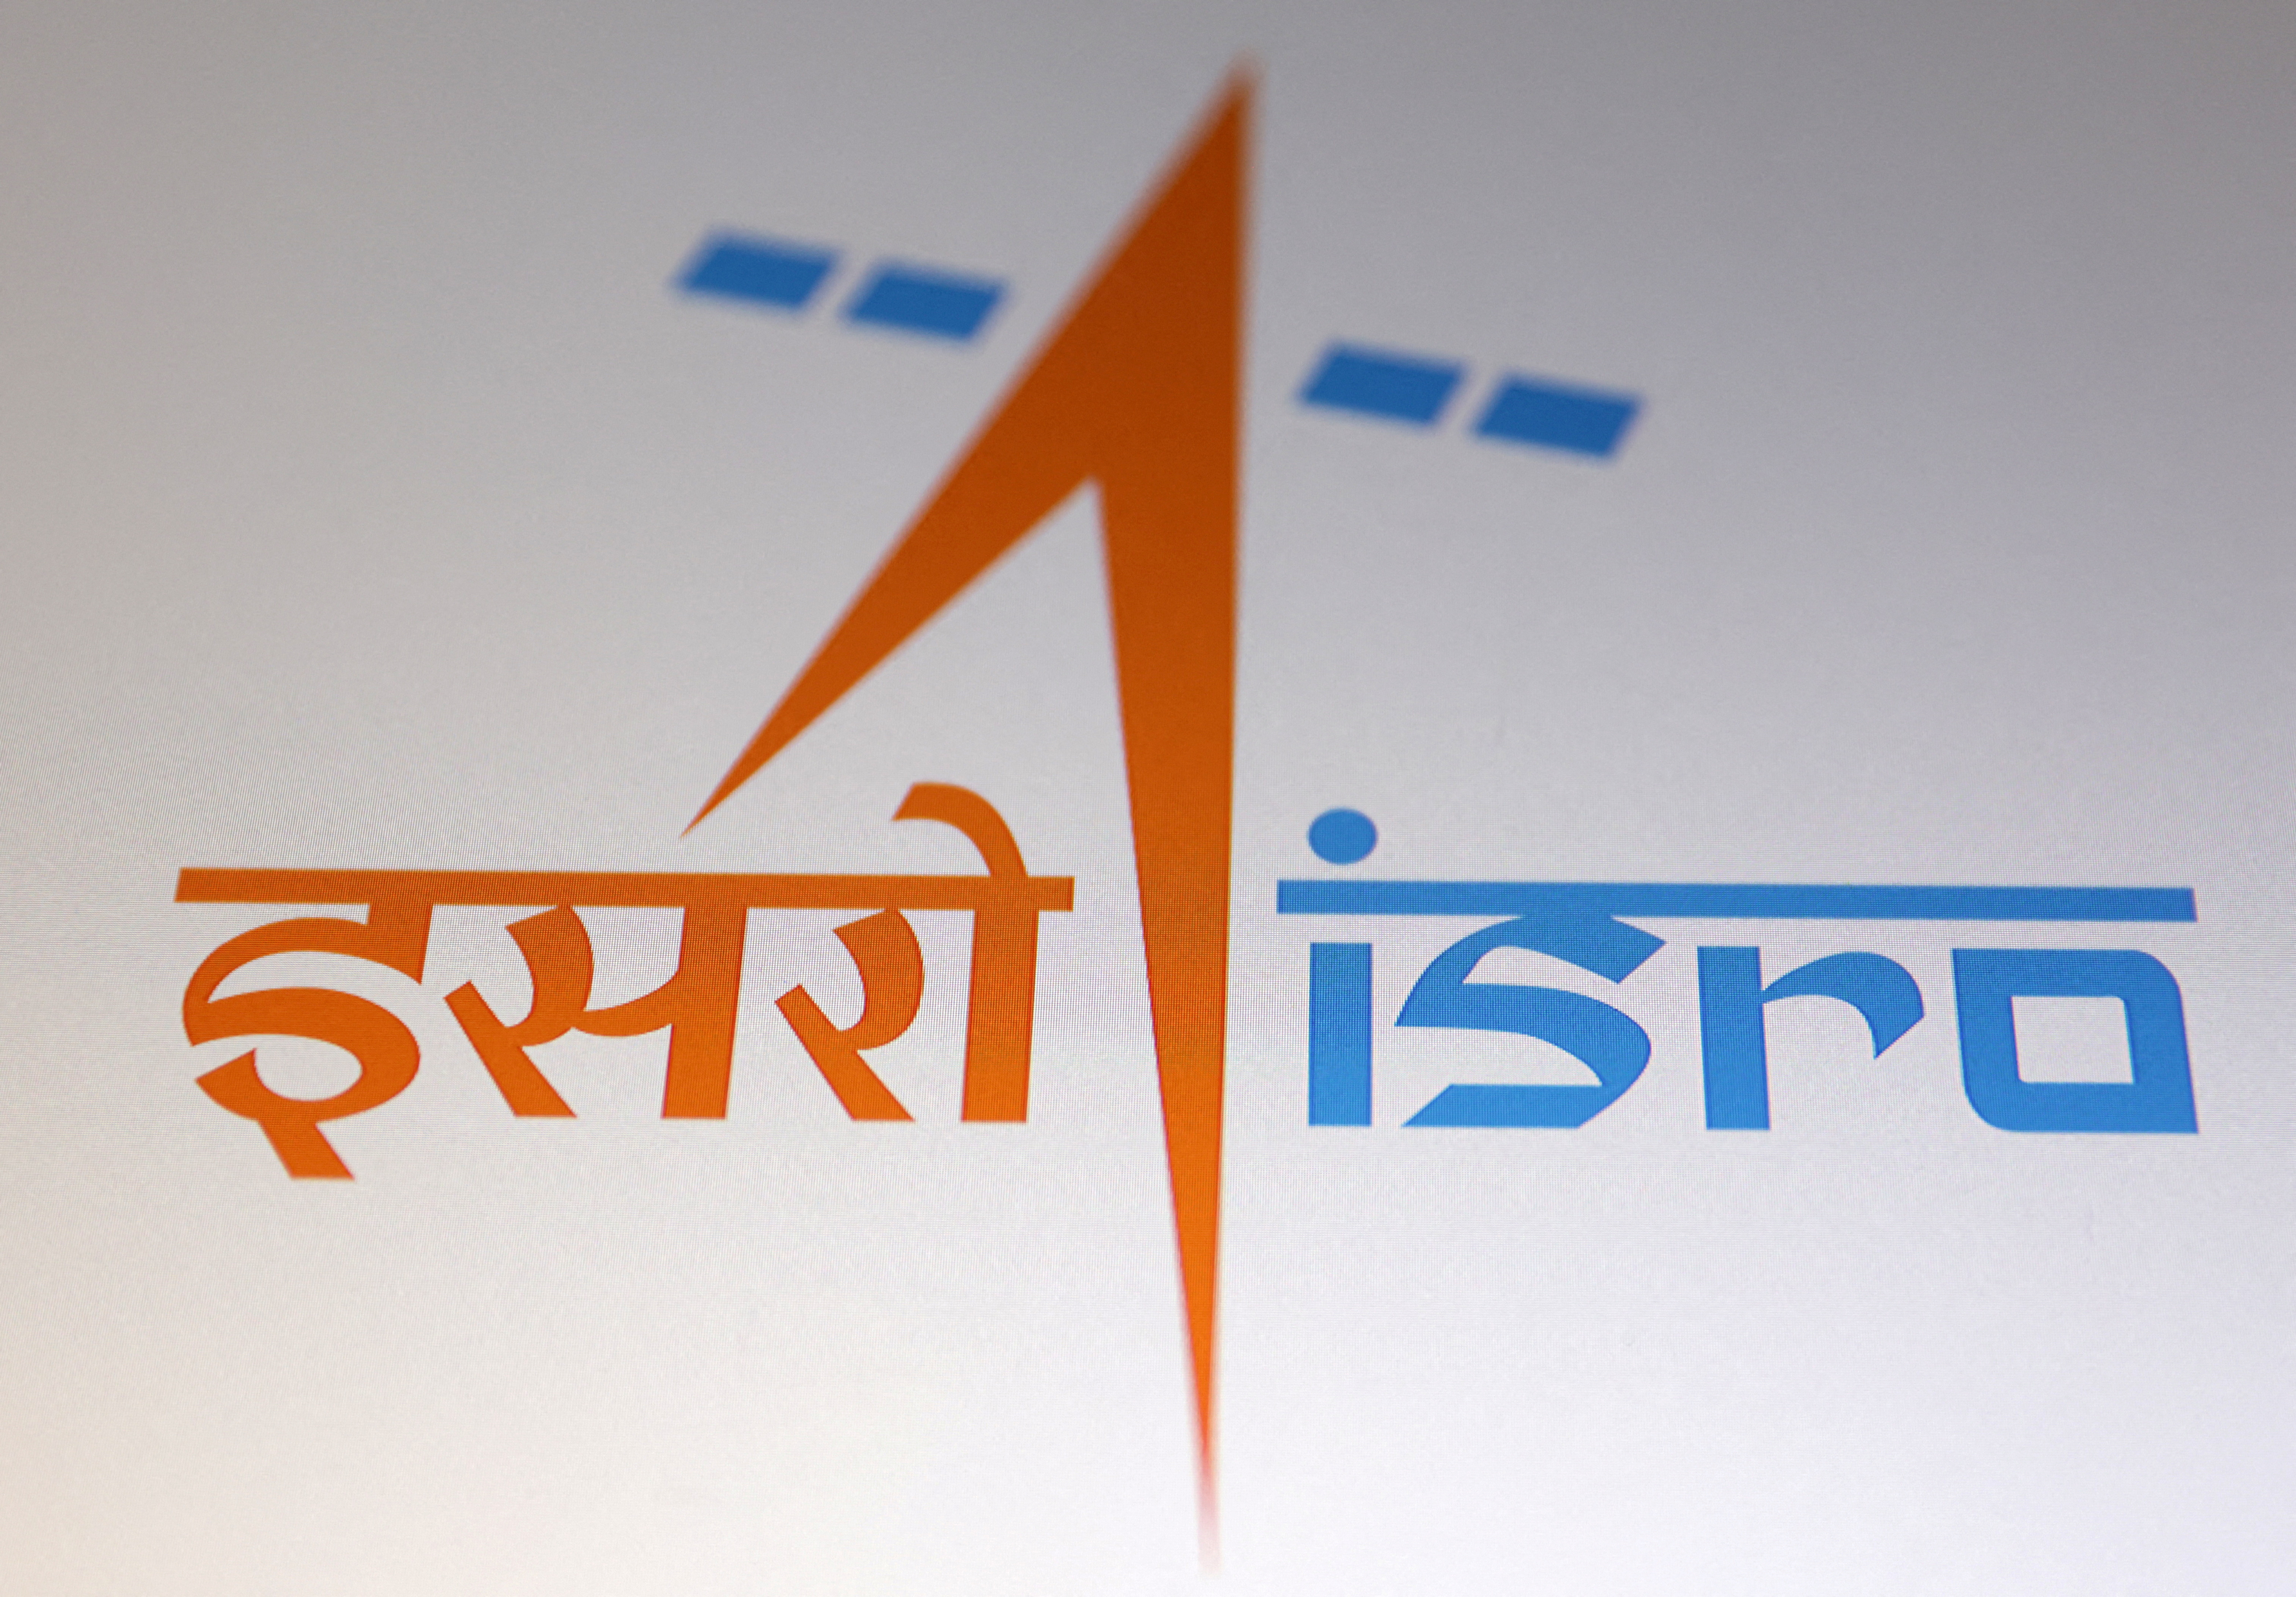 The image shows the Indian Space Research Organization logo